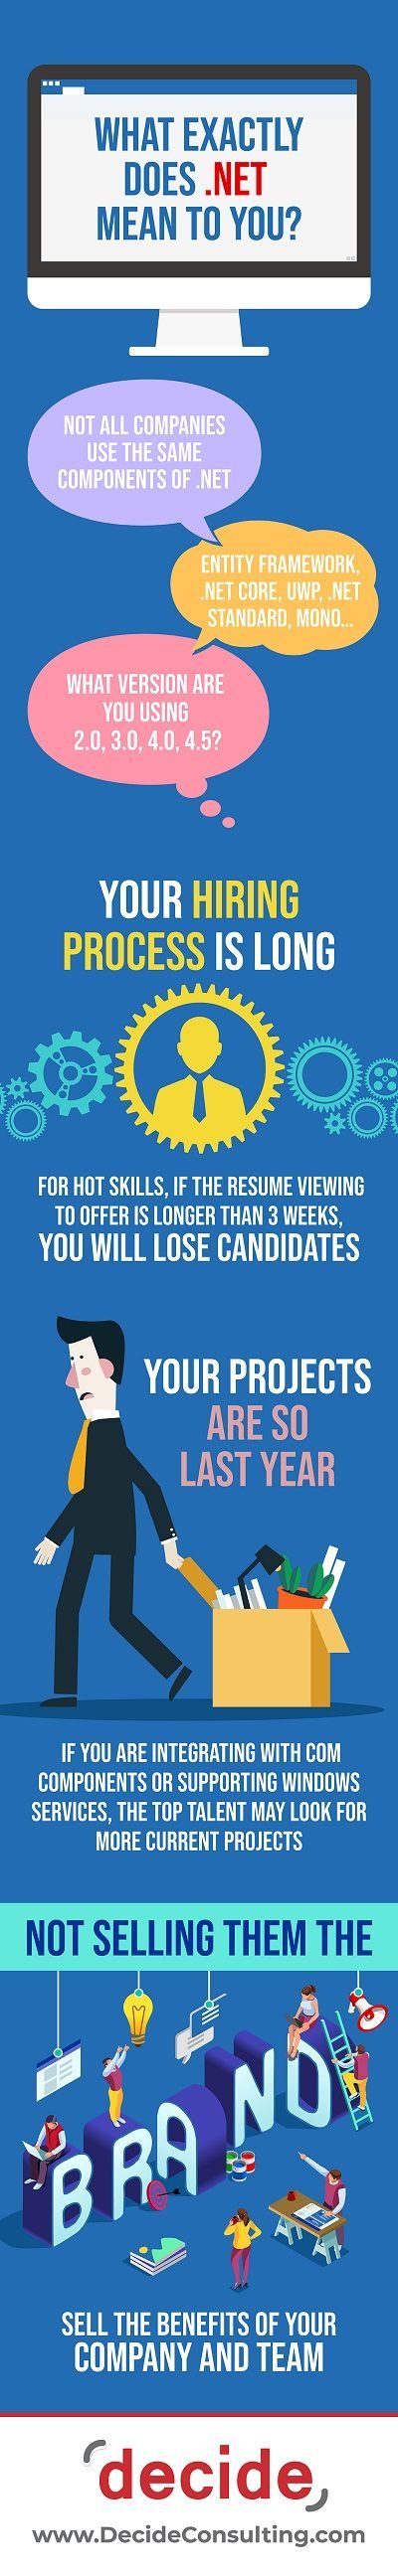 Infographic - What to Do When You Have Two Strong Tech Candidates